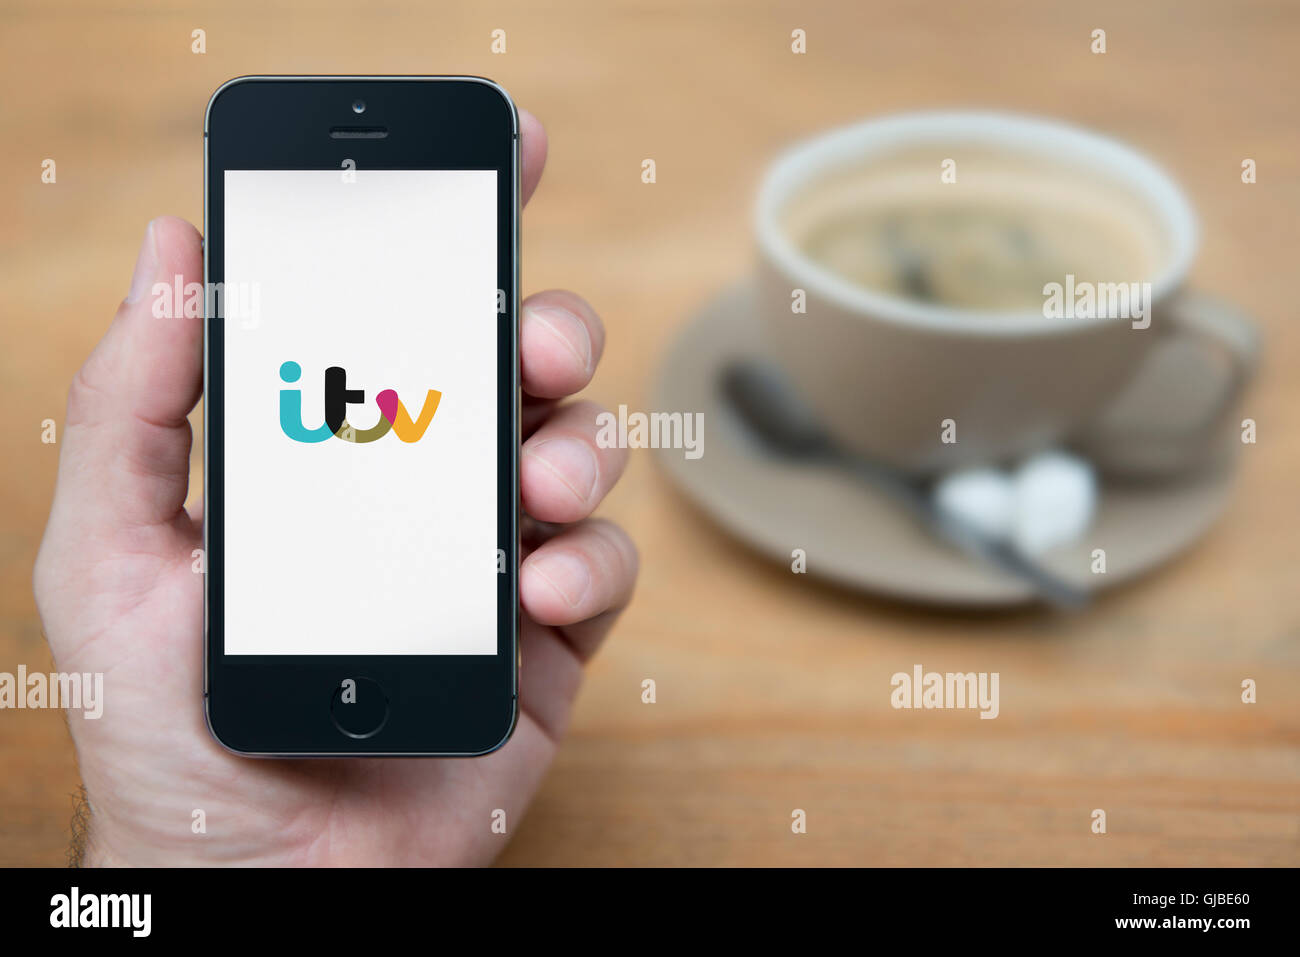 A man looks at his iPhone which displays the ITV logo, while sat with a cup of coffee (Editorial use only). Stock Photo